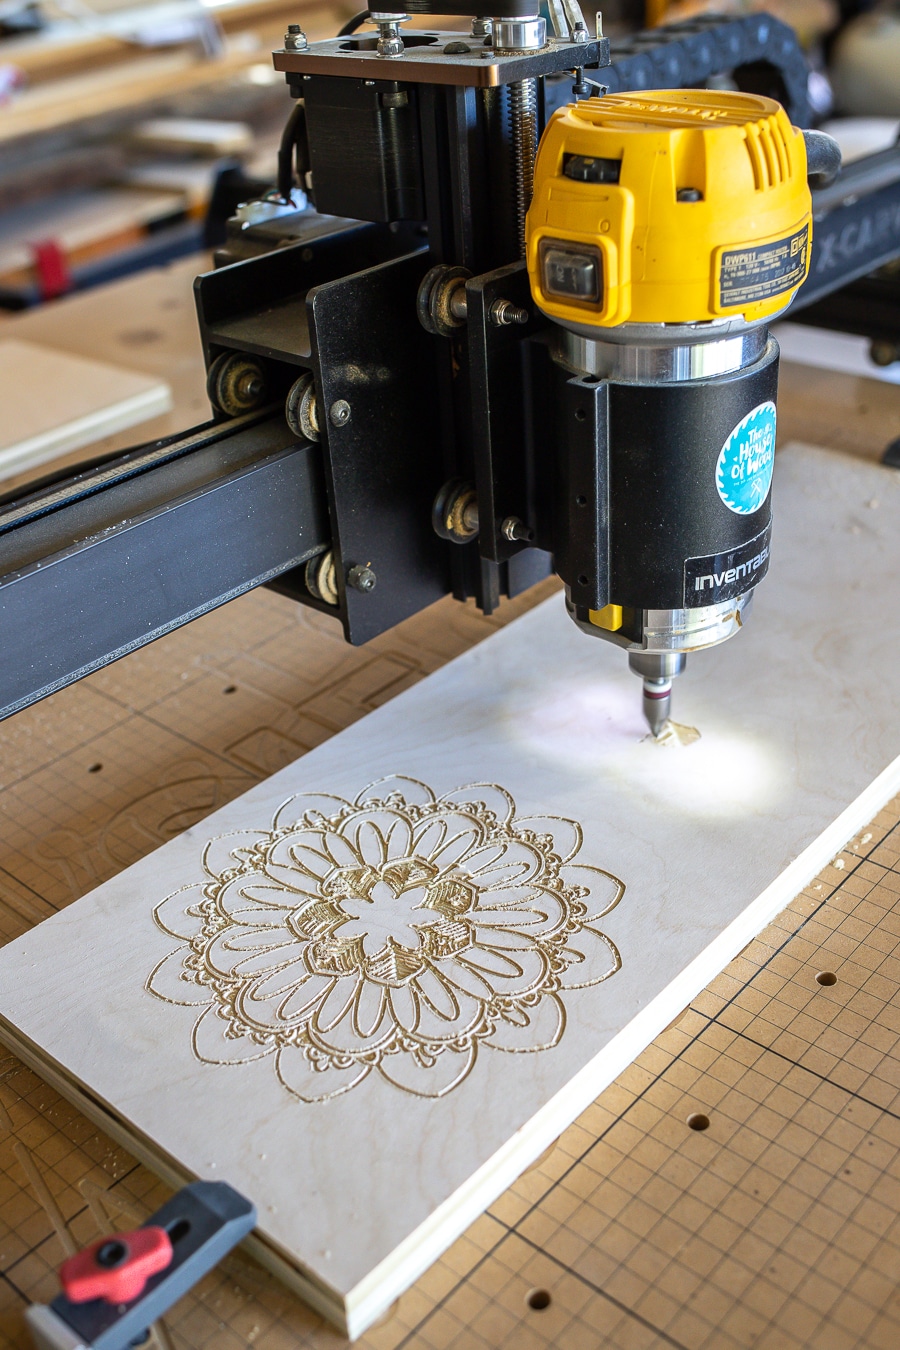 Inventables X-carve carving a drawer face